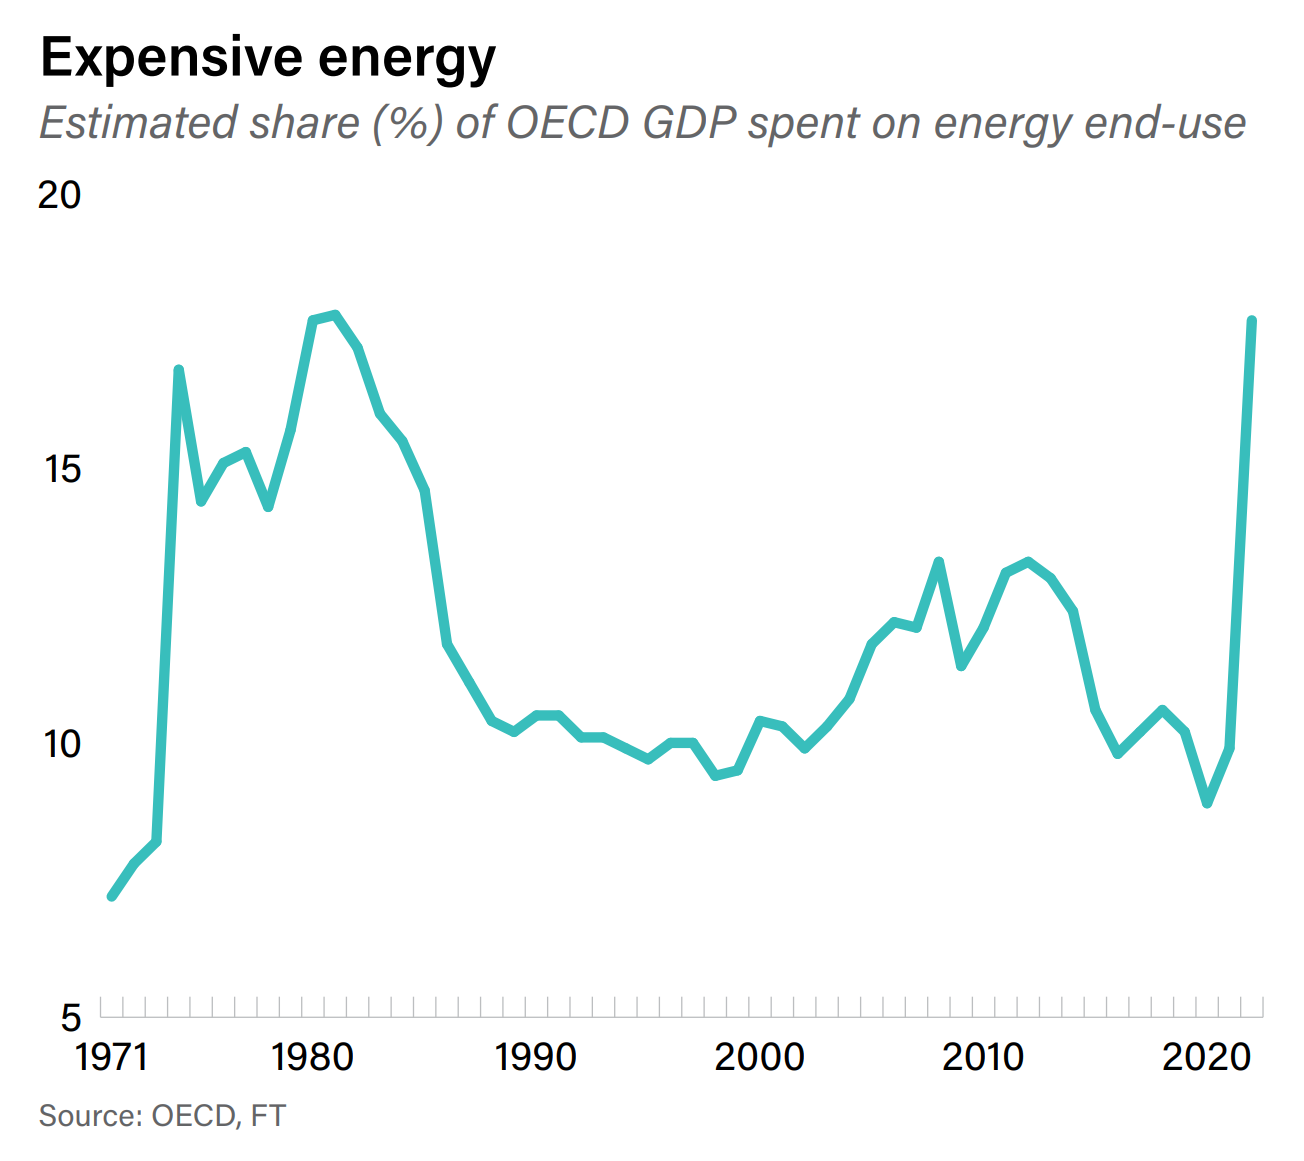 Estimated share (percentage) of OECD GDP spent on energy end-use, 1971-2022. High oil prices will place a heavy burden on poorer developing countries, which have limited cash for expensive energy imports and face surging borrowing costs to fill the hole, resulting in energy shortages and social discontent. Angry over having to shoulder costs for sanctions on Russia they didn’t agree to, emerging markets will chip away at the Western sanctions regime by continuing to trade with Russia. Two of the world’s three biggest energy consumers, China and India, will continue to buy large quantities of Russian crude at a steep discount. The United States will respond by hitting some emerging markets (albeit not China or India) with secondary sanctions, further inflaming tensions between industrialized economies and emerging markets already rocked by high inflation (please see risk #4), the war in Ukraine, the Covid-19 pandemic, and climate change. Data: OECD, FT. Graphic: Eurasia Group